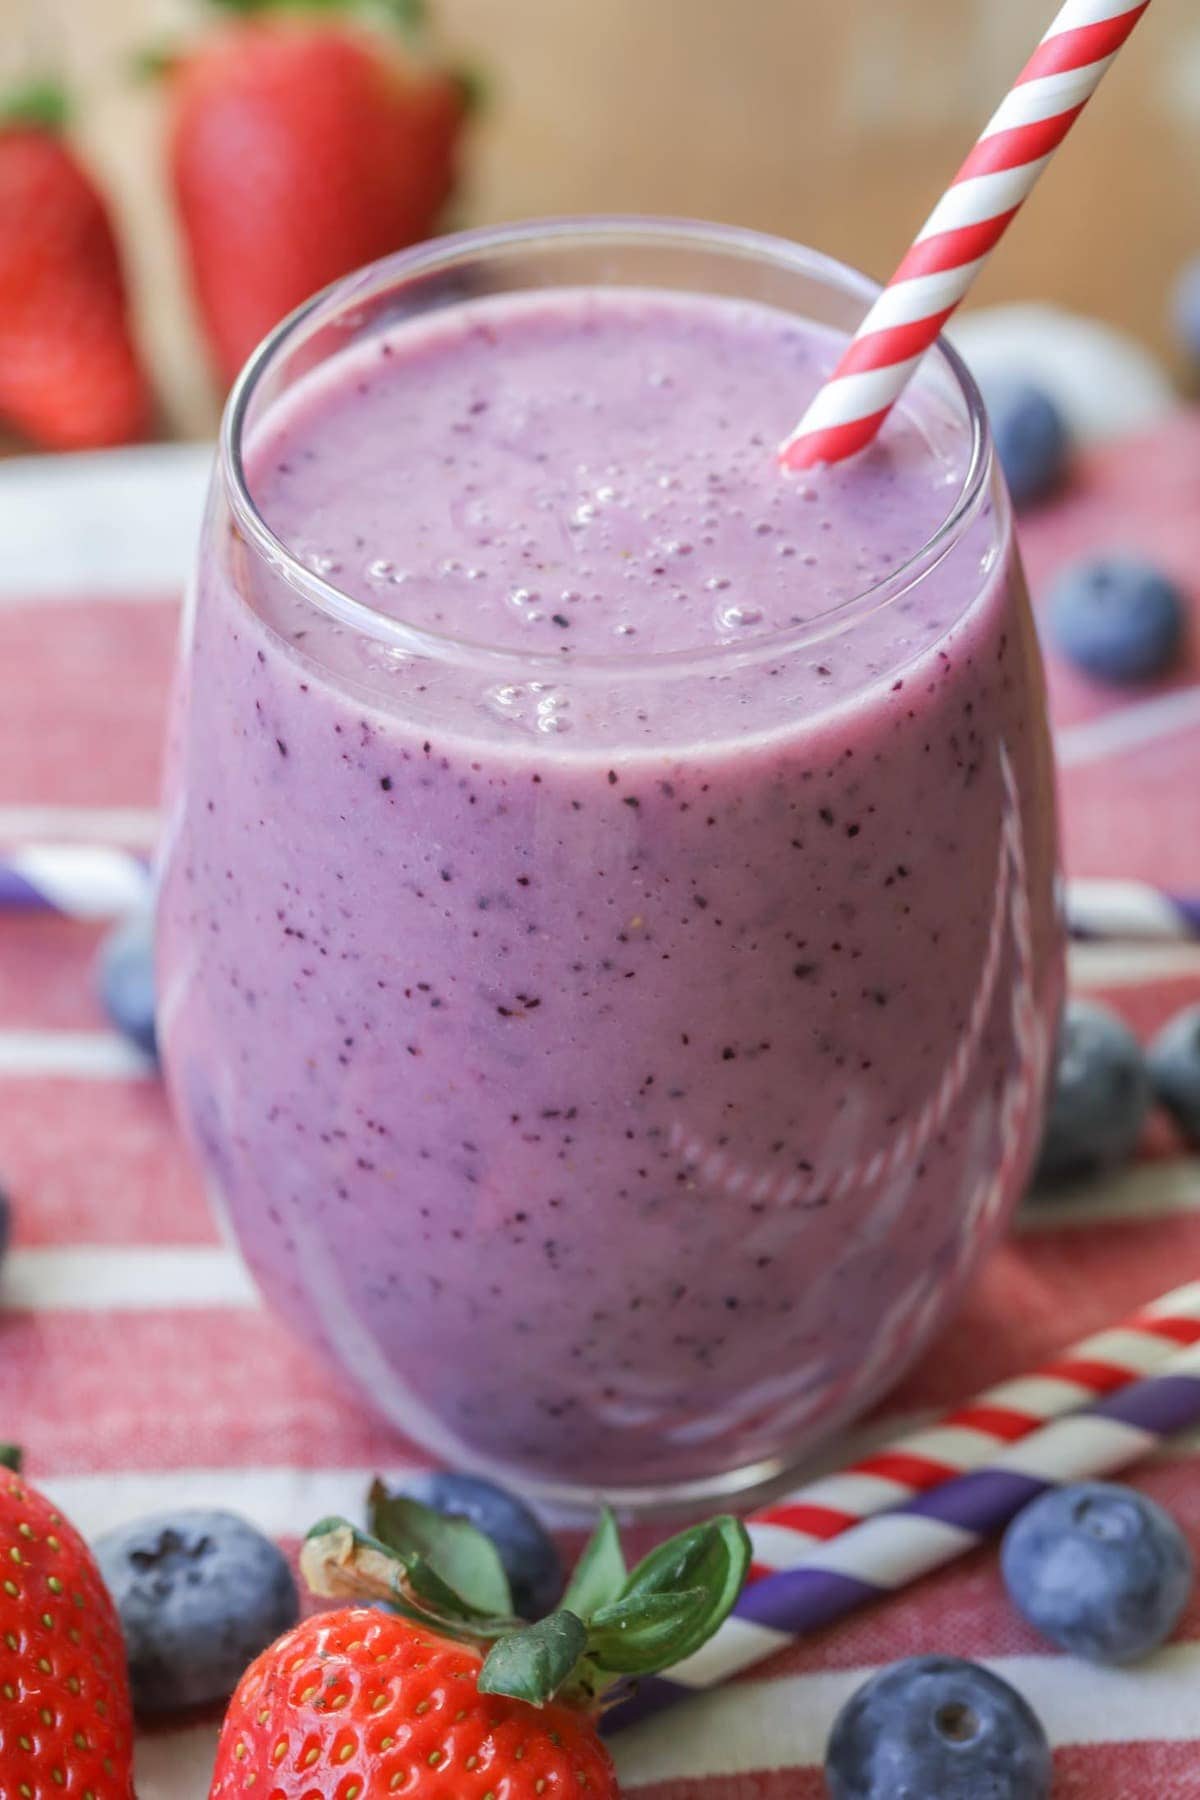 Peach smoothie - a glass filled with strawberry blueberry smoothie.